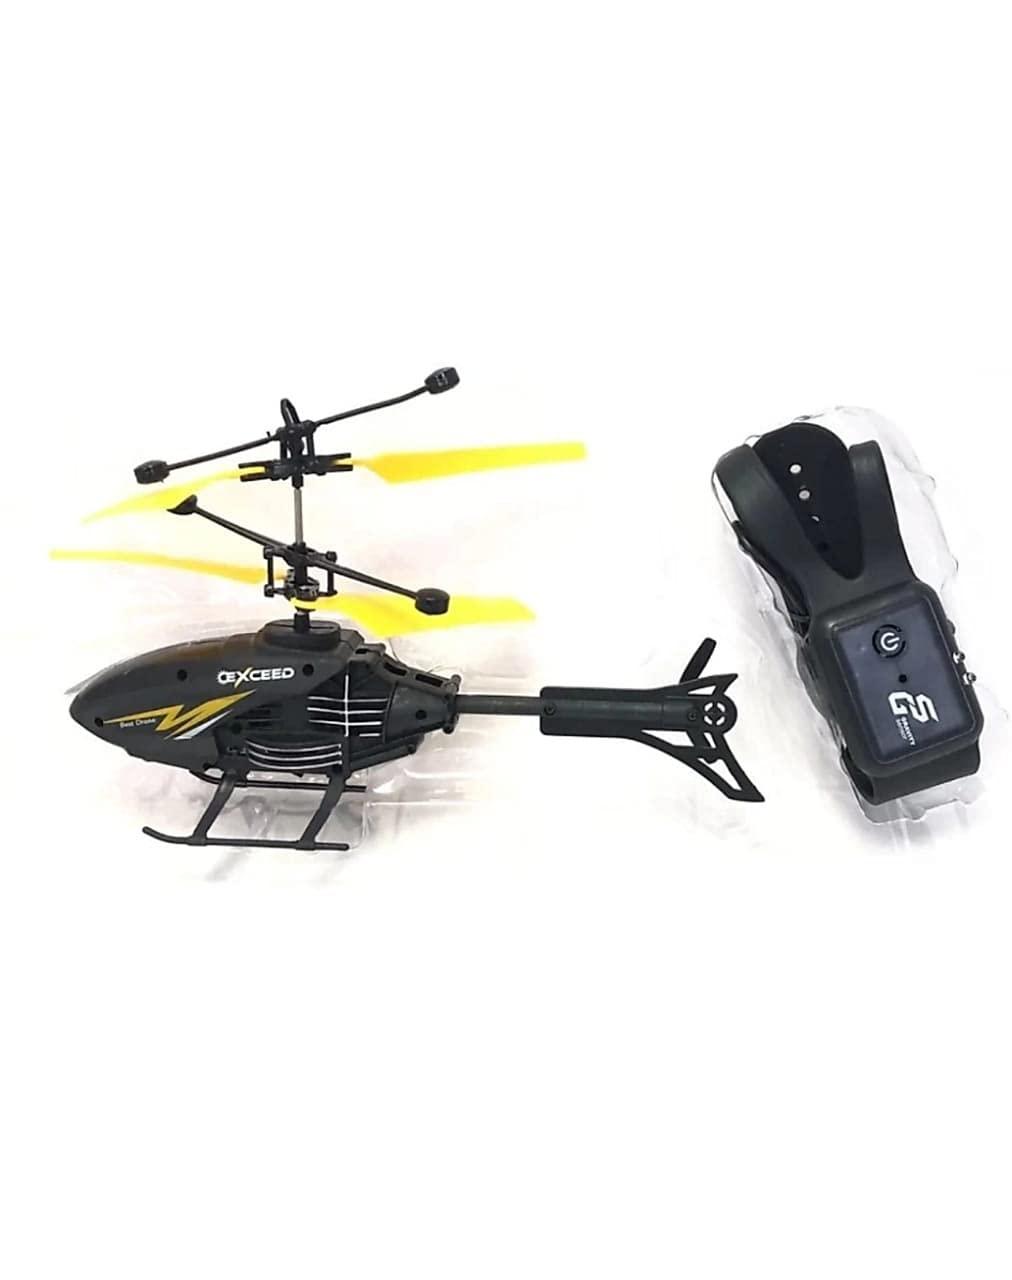 Hand Sensor Remote Control Helicopter: Safety and maintenance for hand sensor remote control helicopter